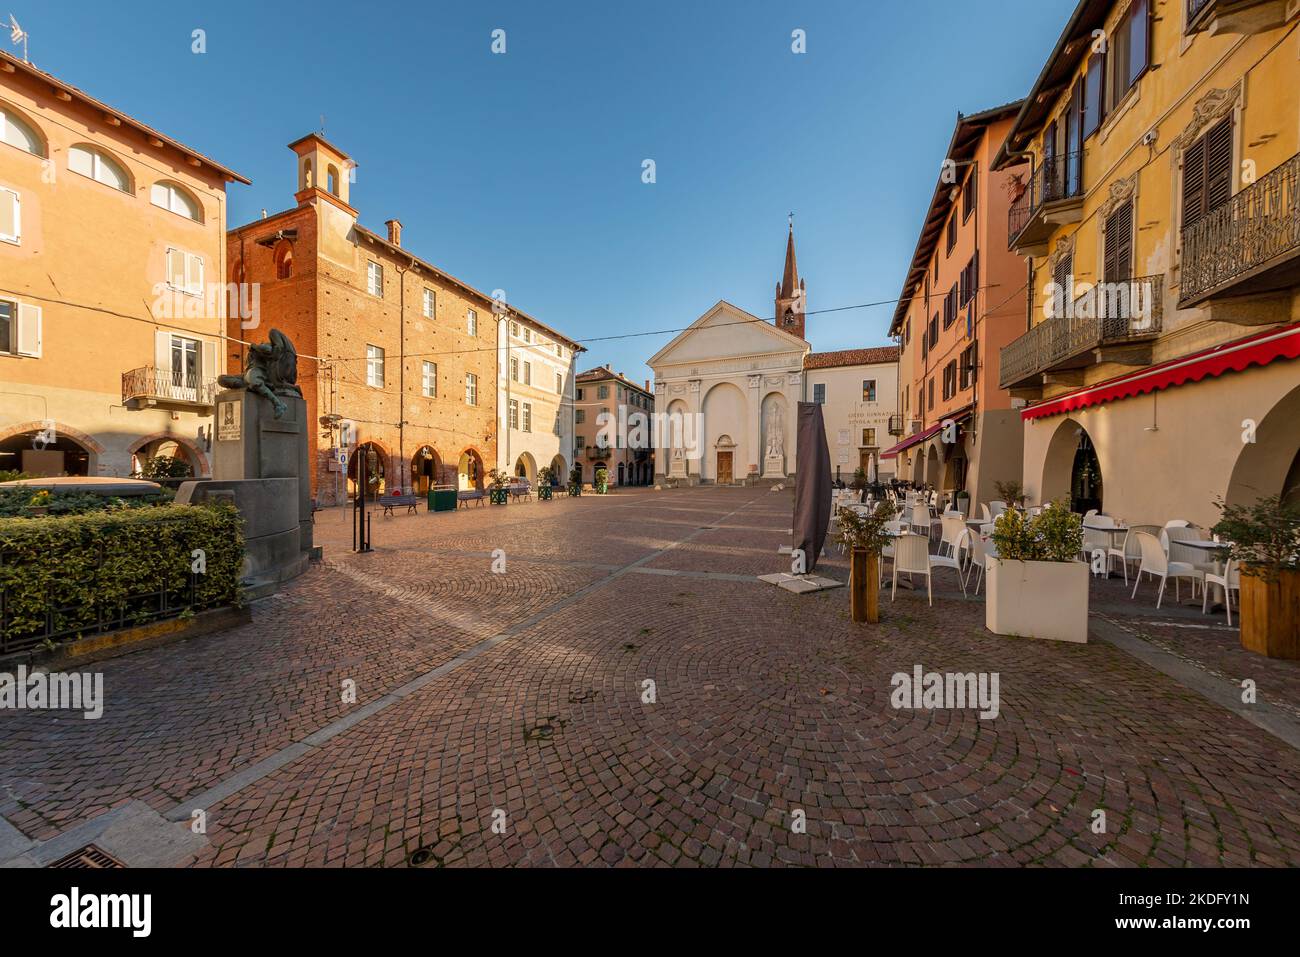 Carmagnola, Turin, Italy - November 05, 2022: Sant Agostino square with Church of Sant'Agostino (15th century) in Gothic style and ancient medieval bu Stock Photo